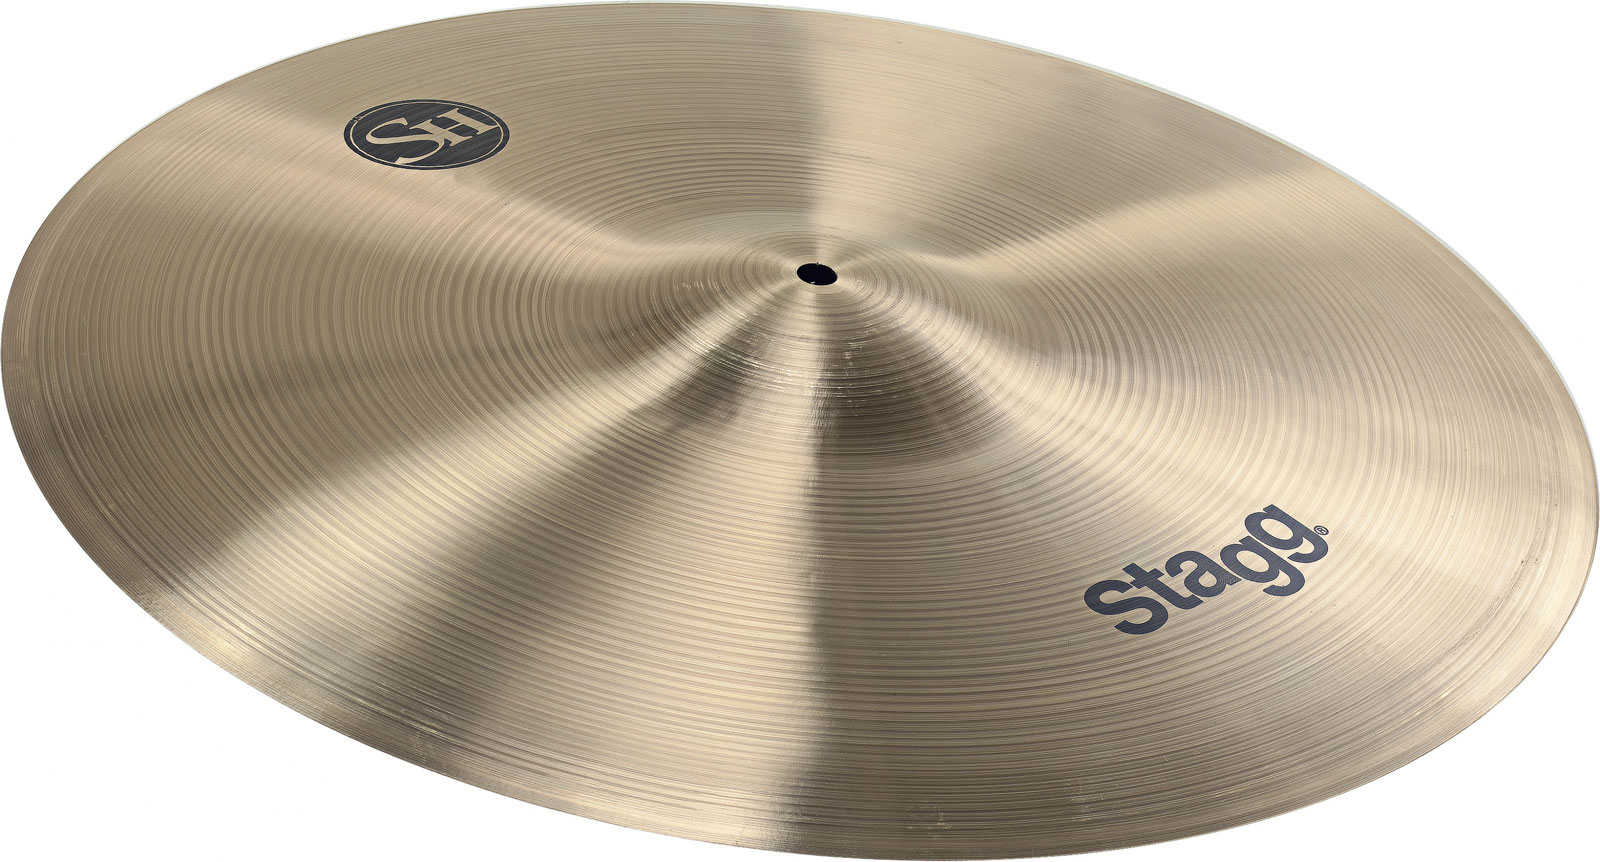 STAGG SH 20